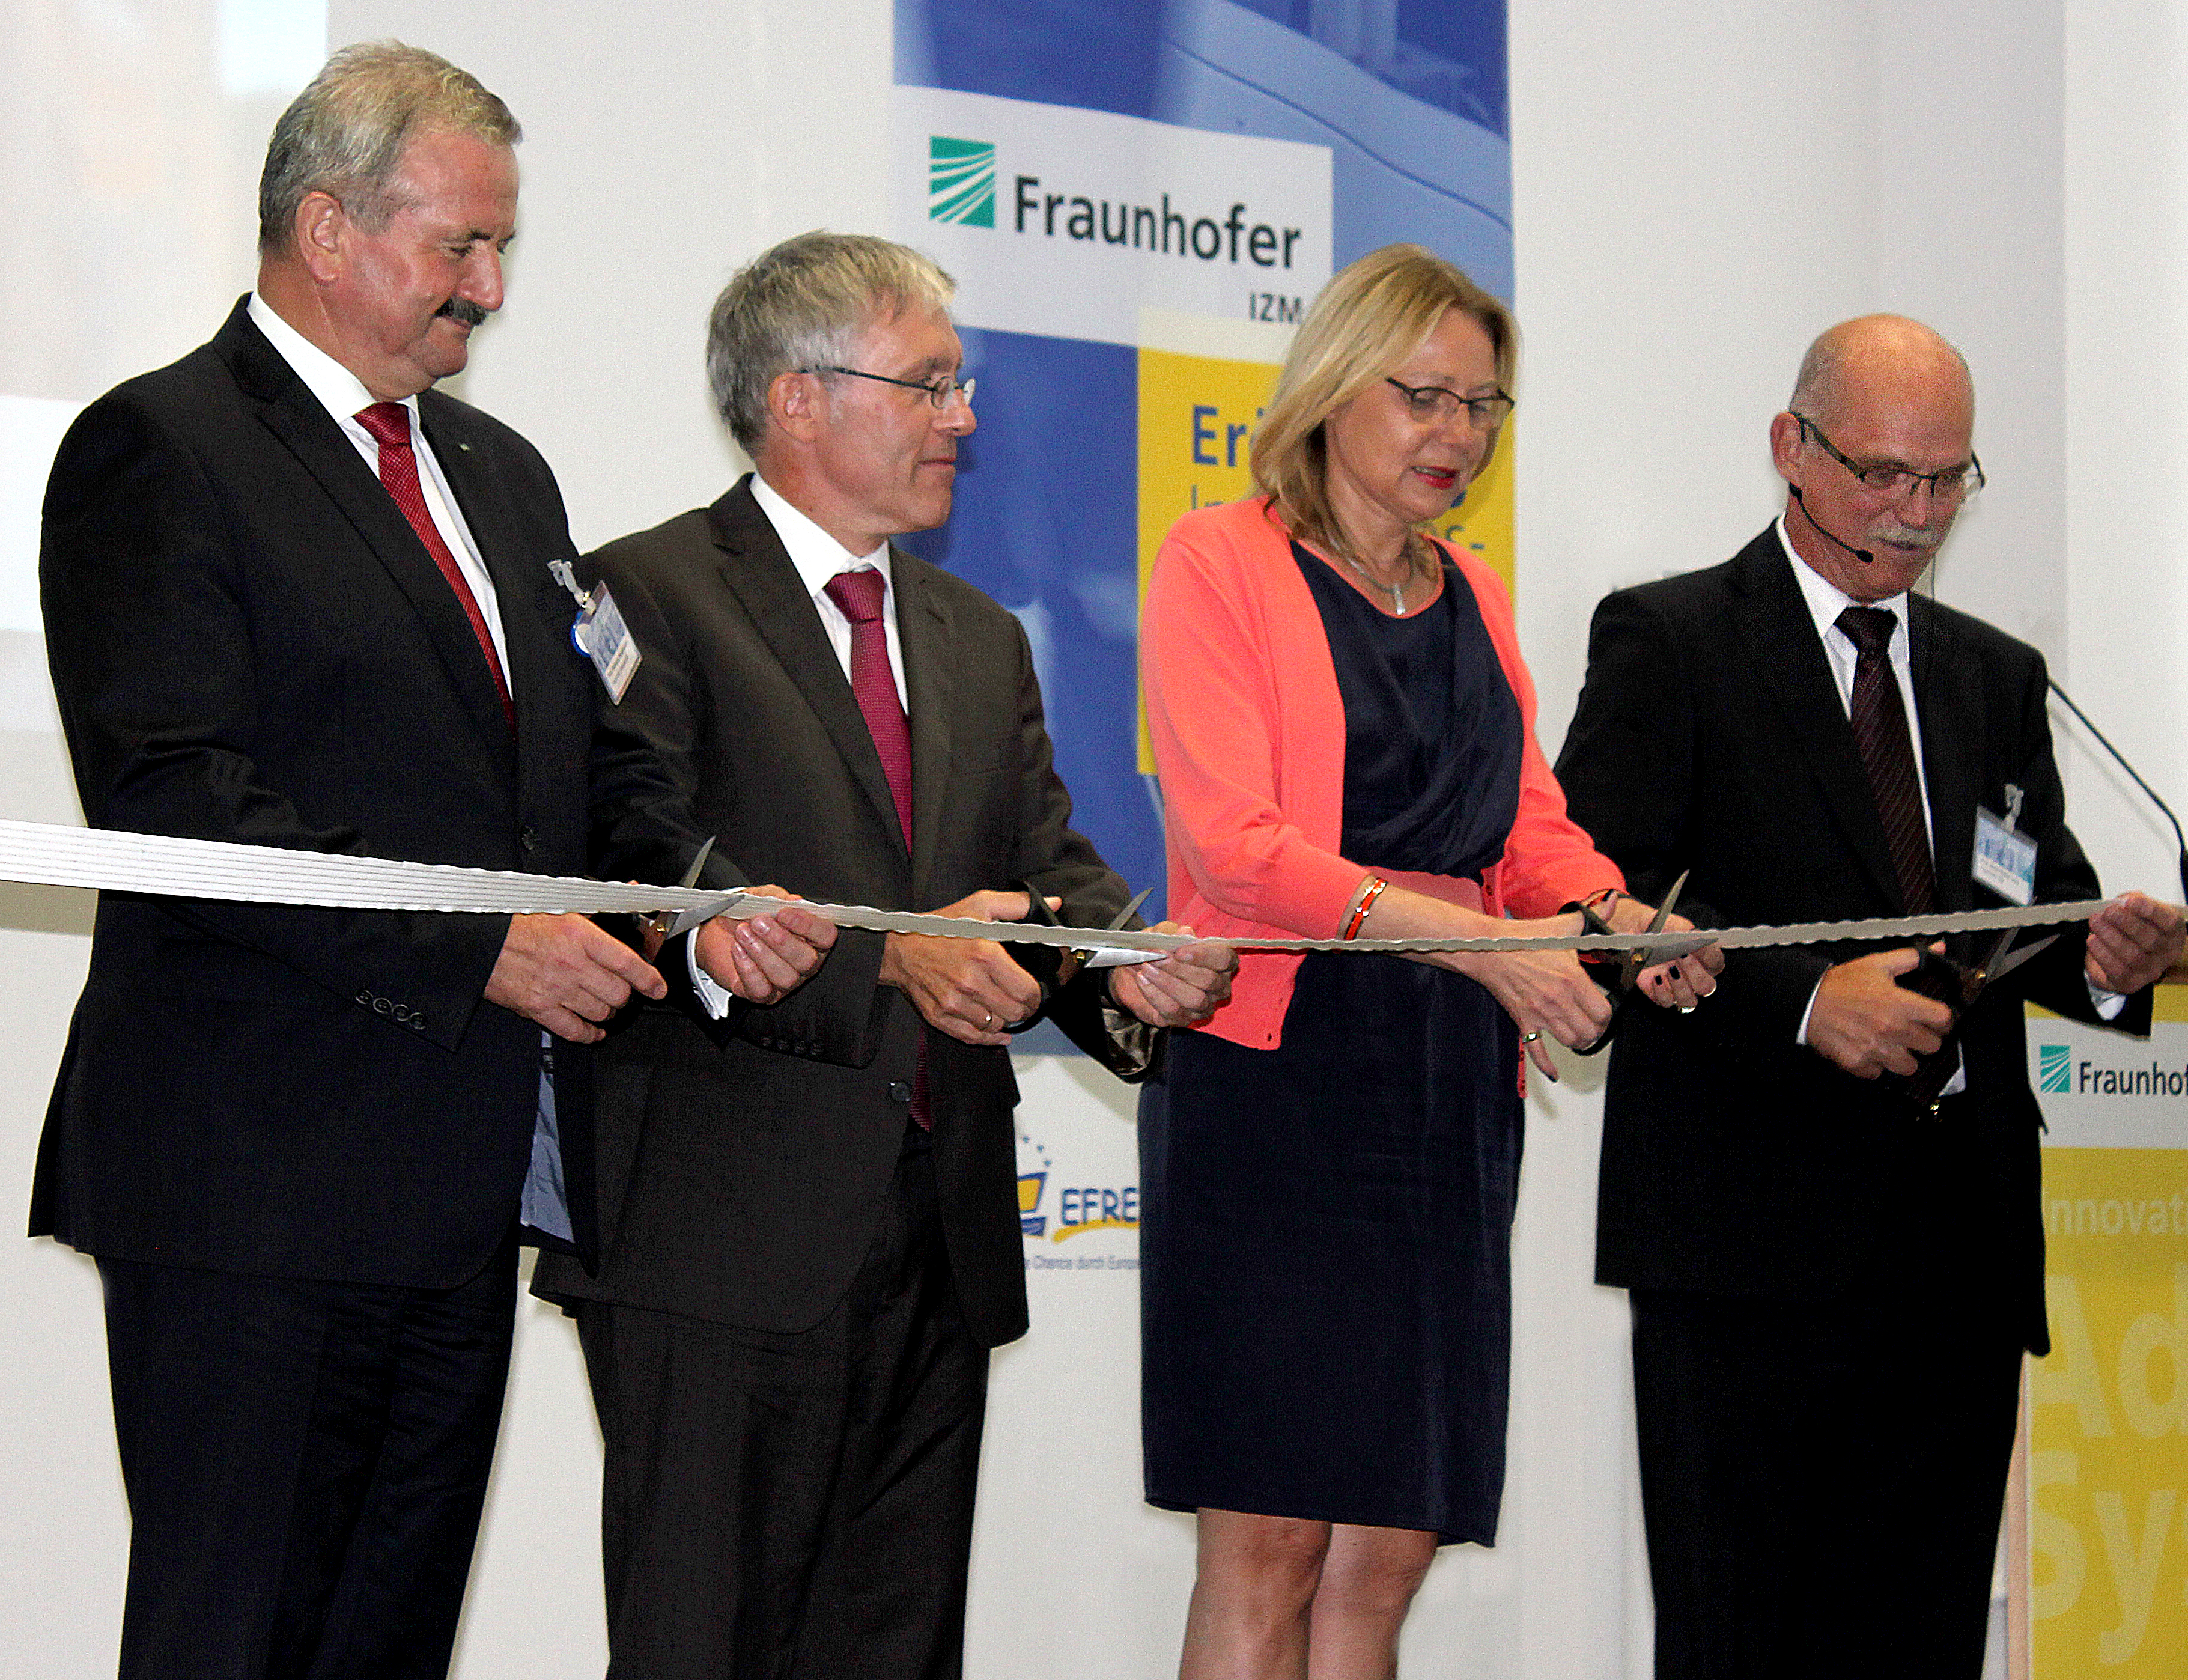 New Fraunhofer IZM Research and Development Center to Deliver the Microelectronics of Tomorrow